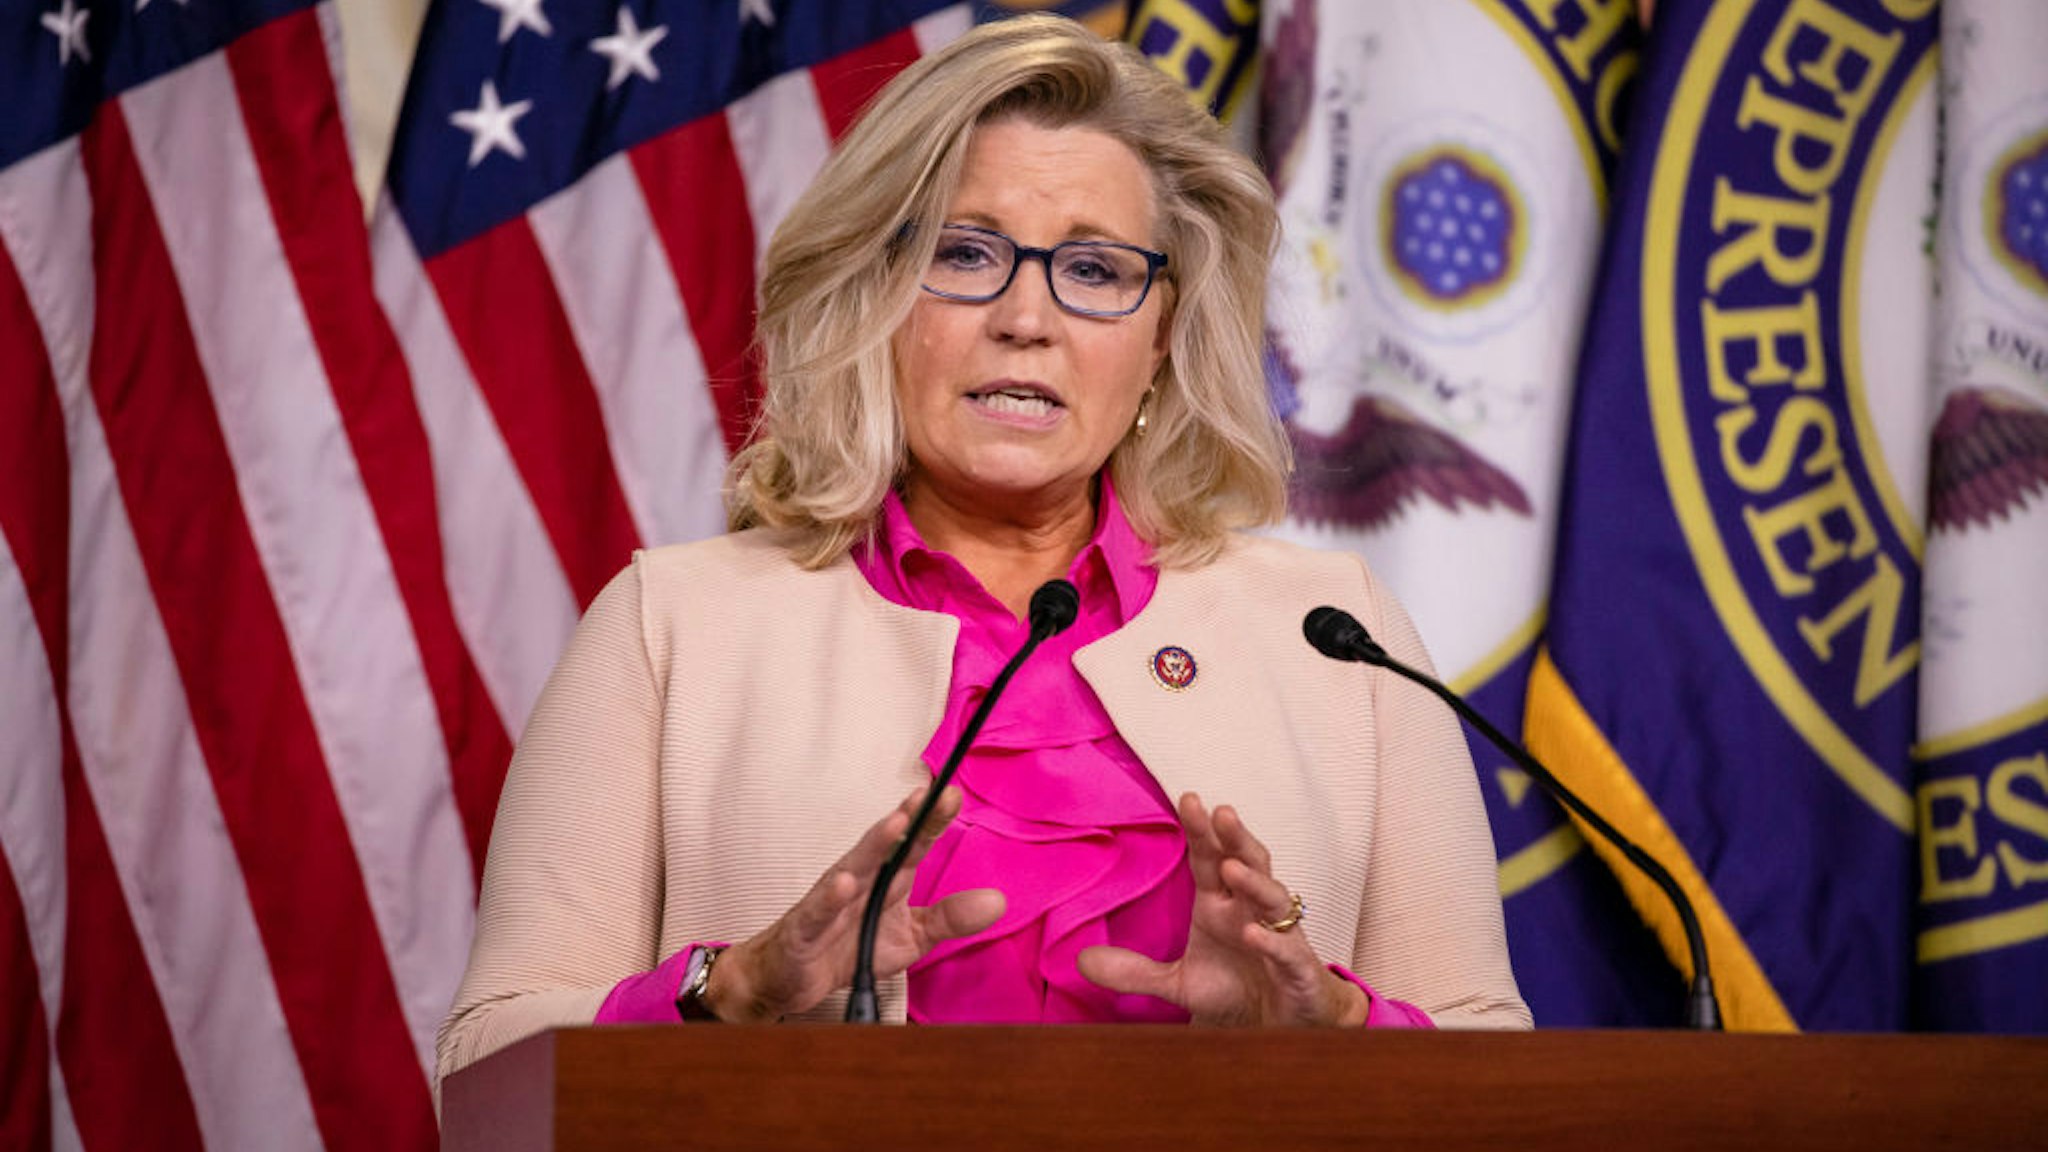 WASHINGTON, DC - JULY 21: U.S. Rep. Liz Cheney (R-WY) speaks during a news conference with other Republican members of the House of Representatives at the Capitol on July 21, 2020 in Washington, DC. (Photo by Samuel Corum/Getty Images)